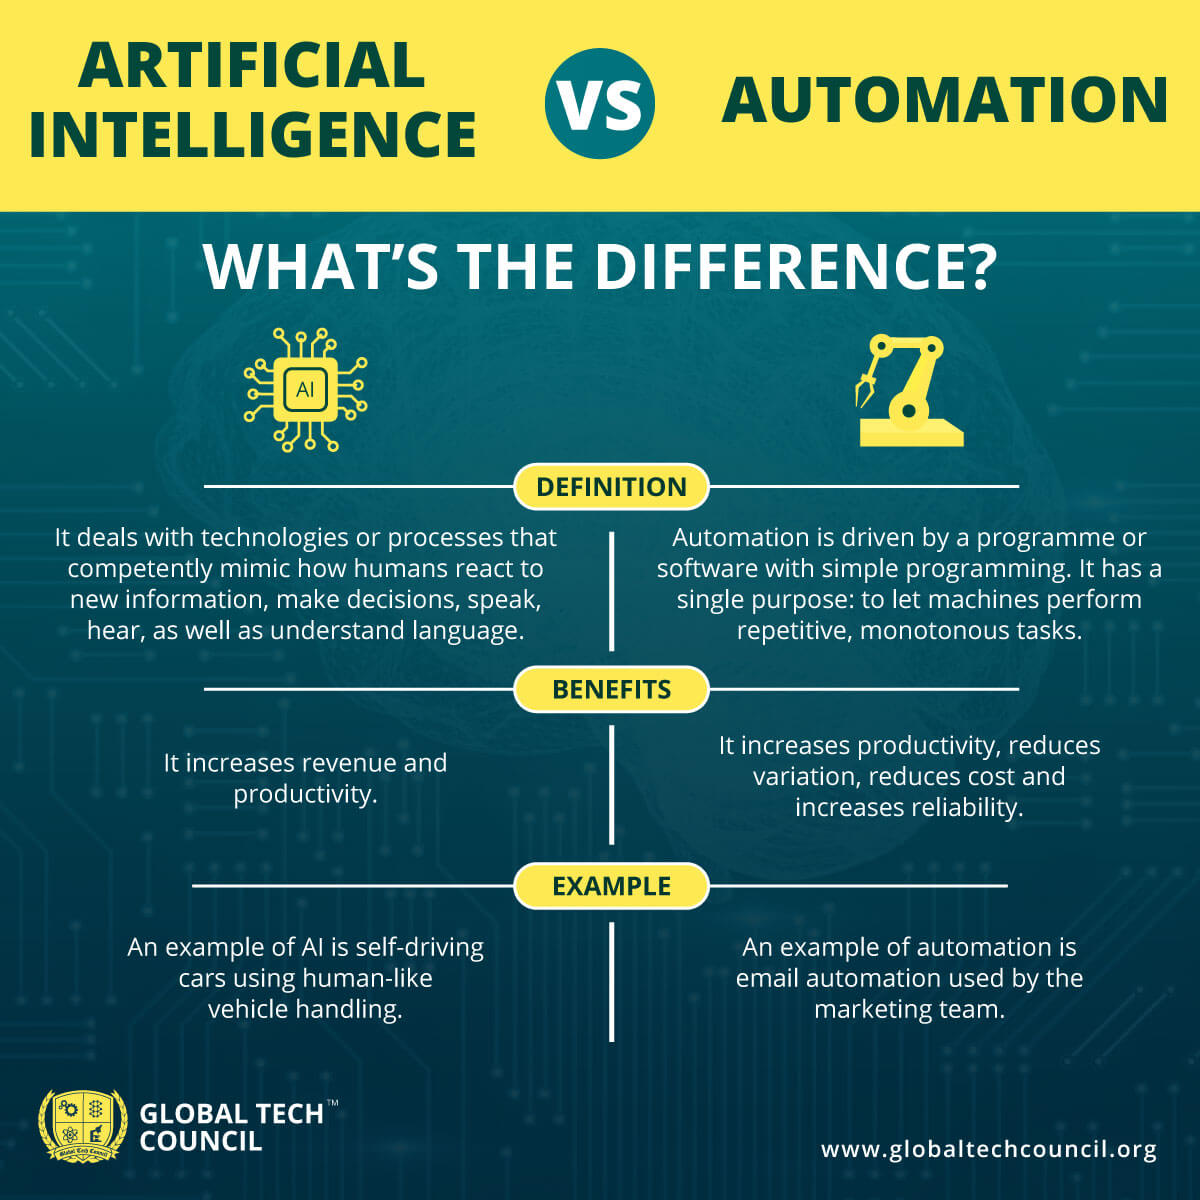 AI vs.Automation: What’s the Difference?